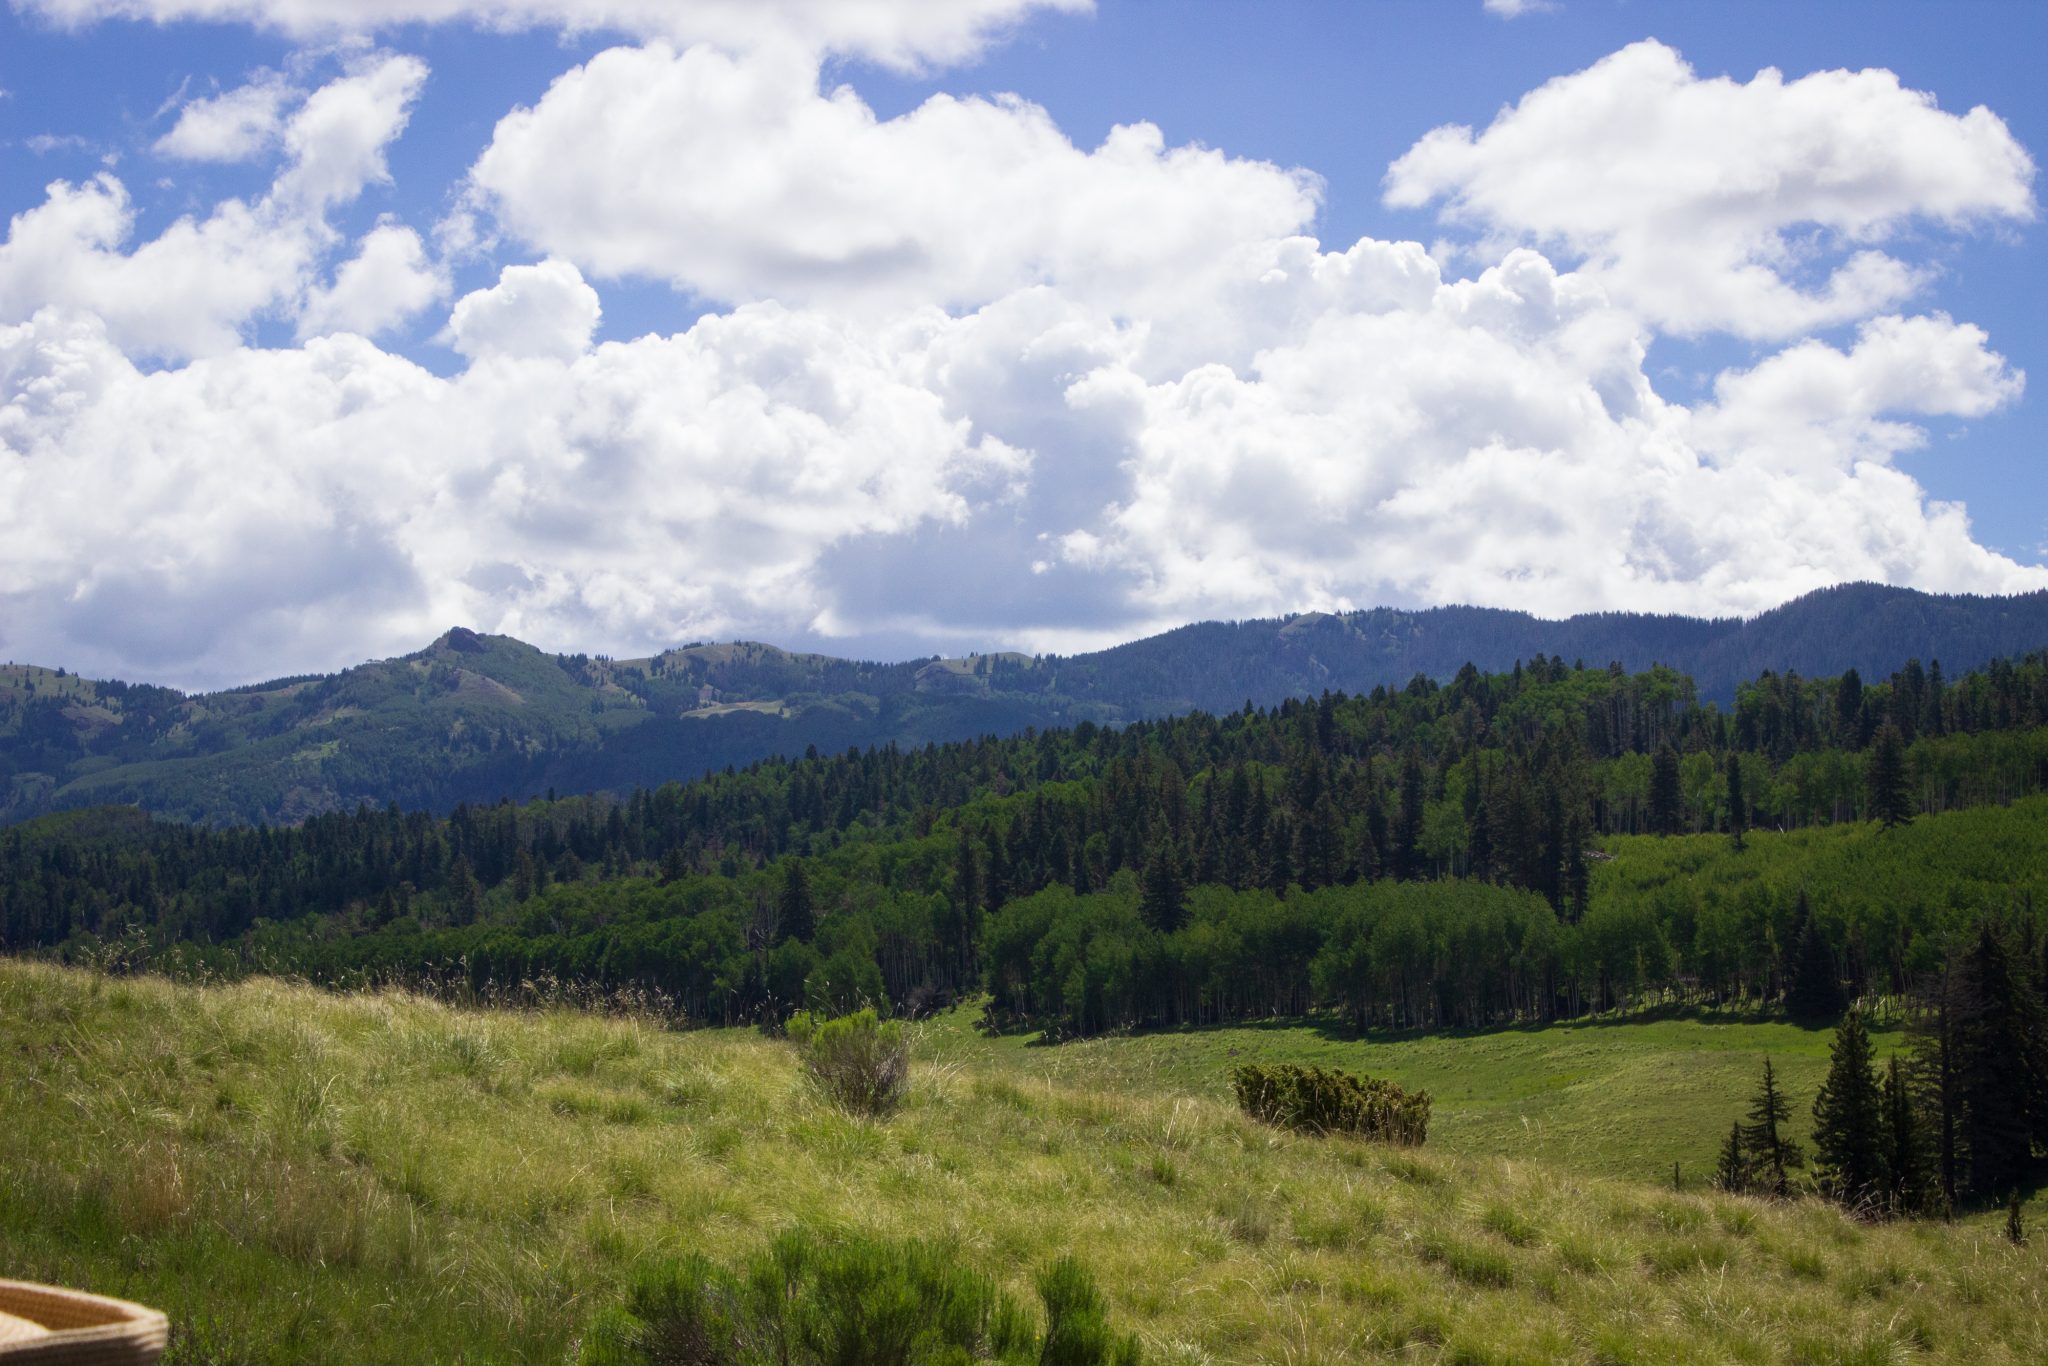 View of the San Juan mountains from the Cumbres and Toltec Railroad